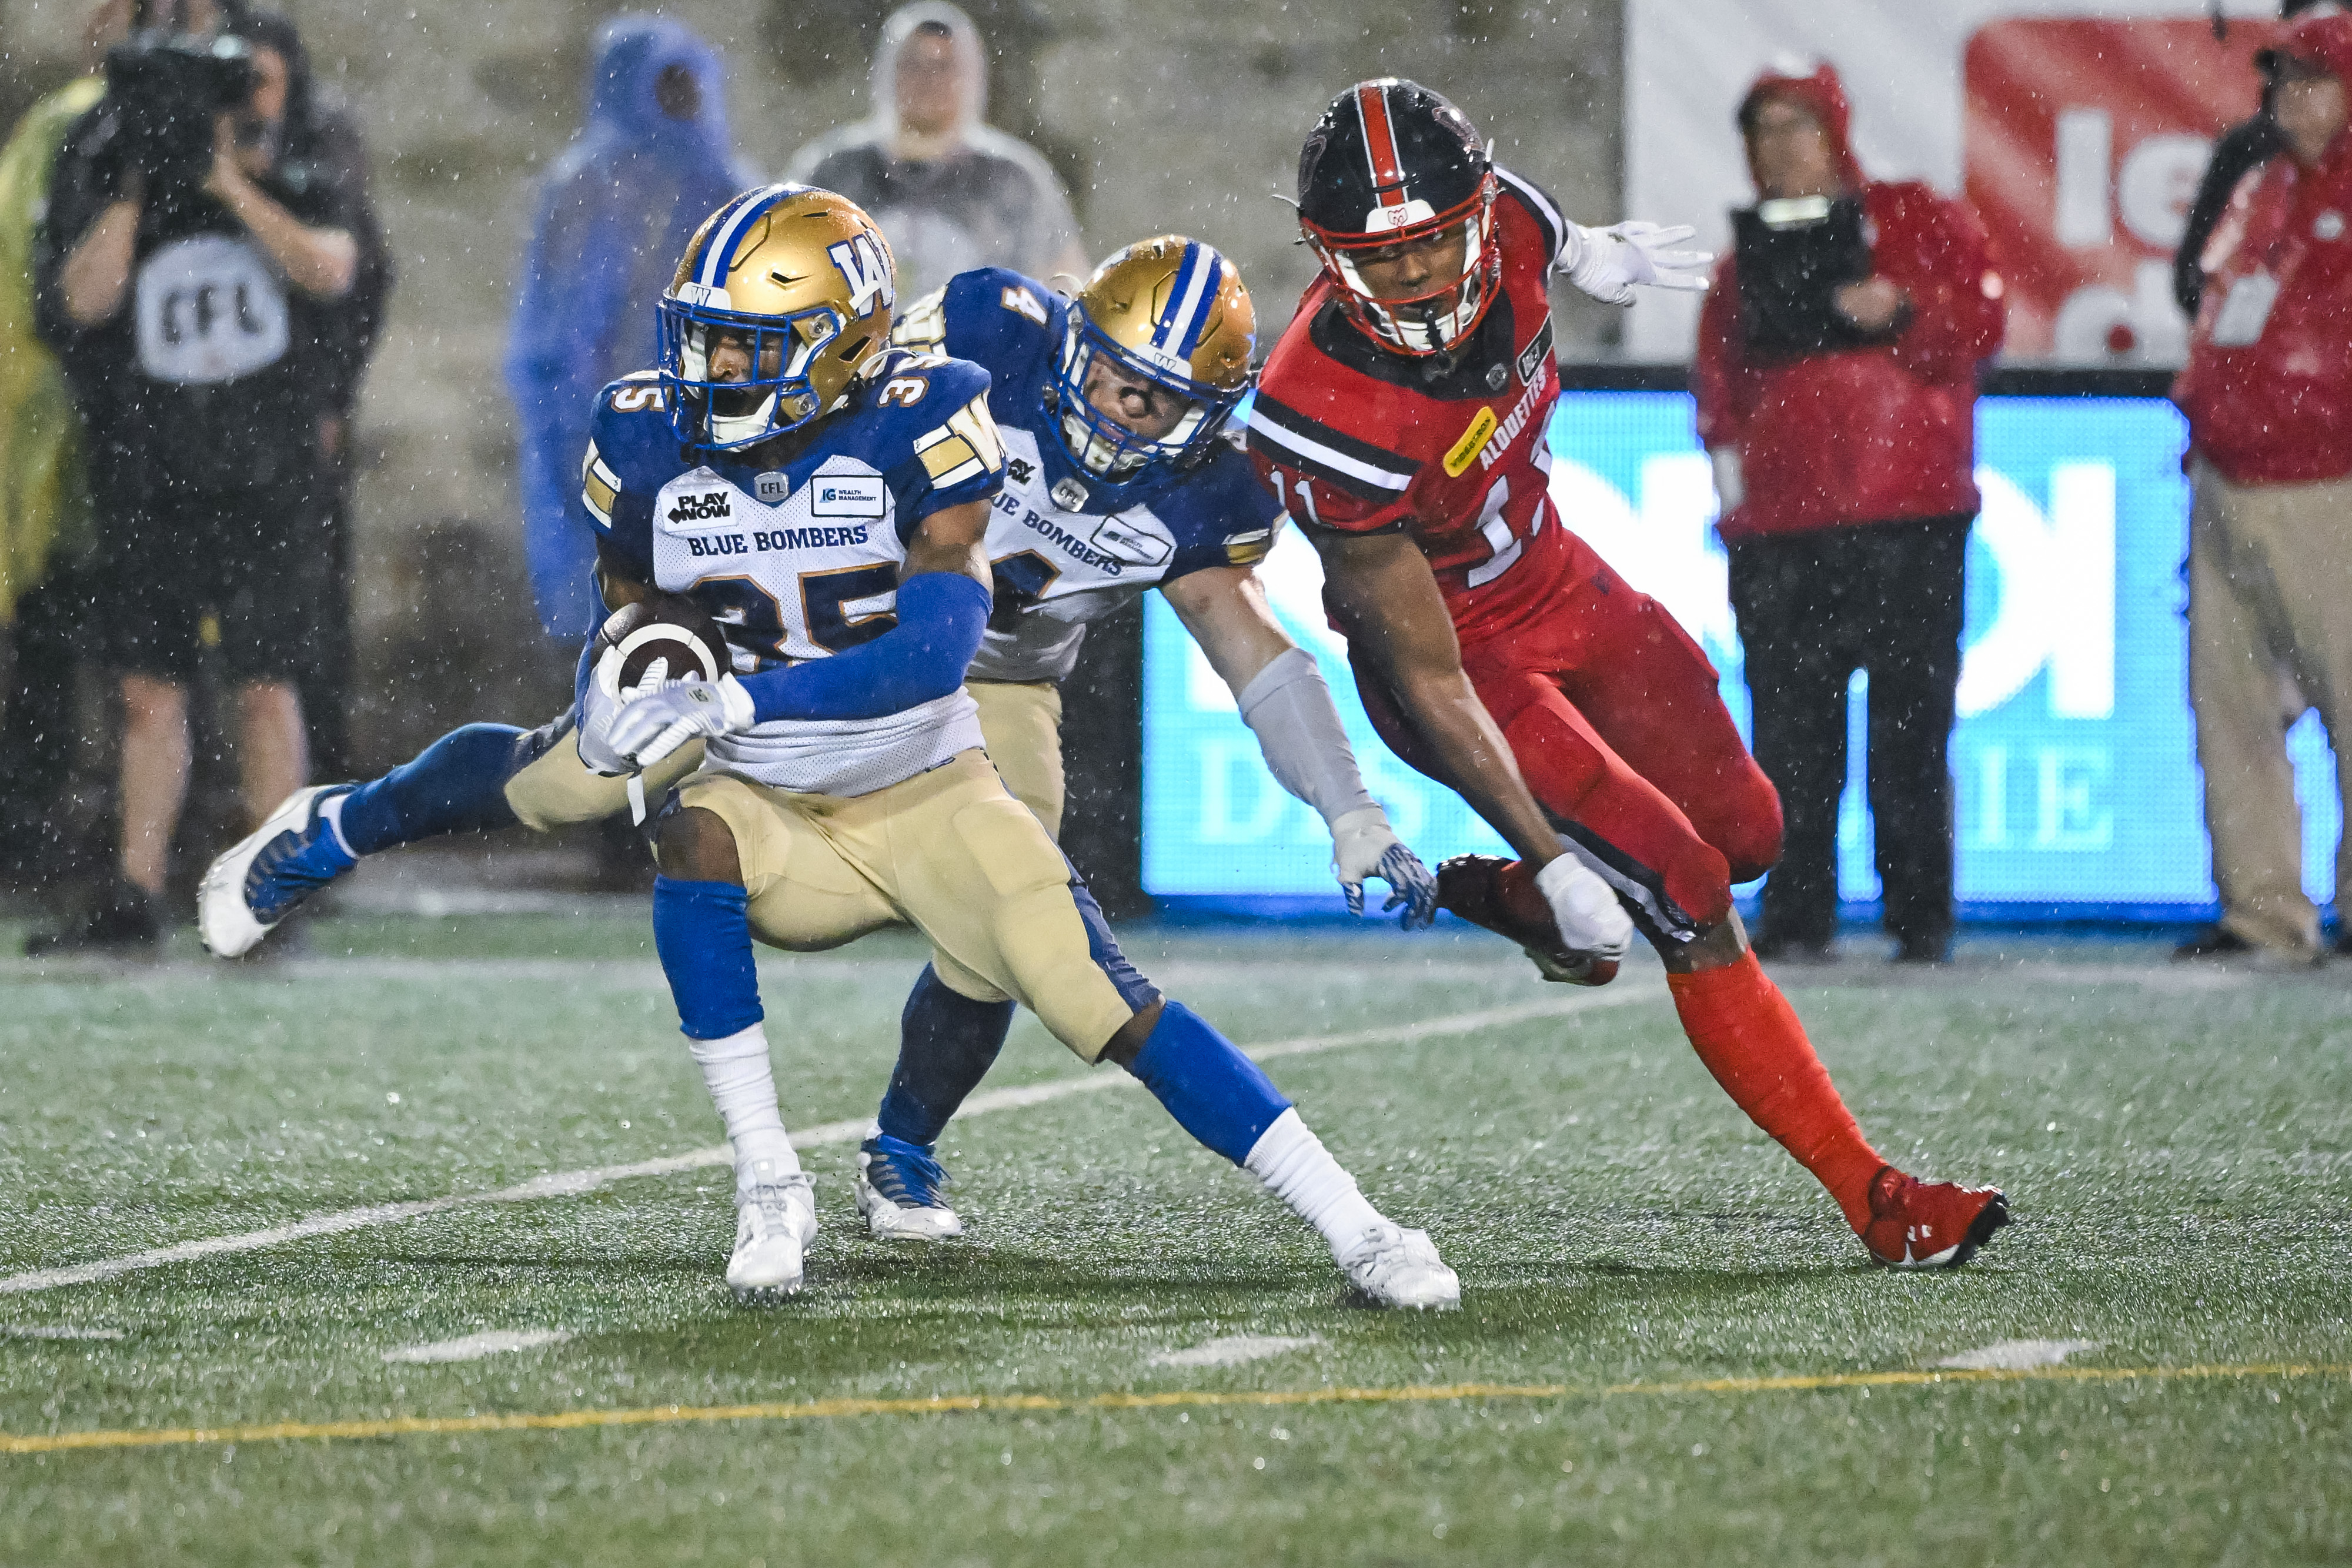 Montreal Alouettes at Winnipeg Blue Bombers Free Live Stream - How to Watch and Stream Major League and College Sports